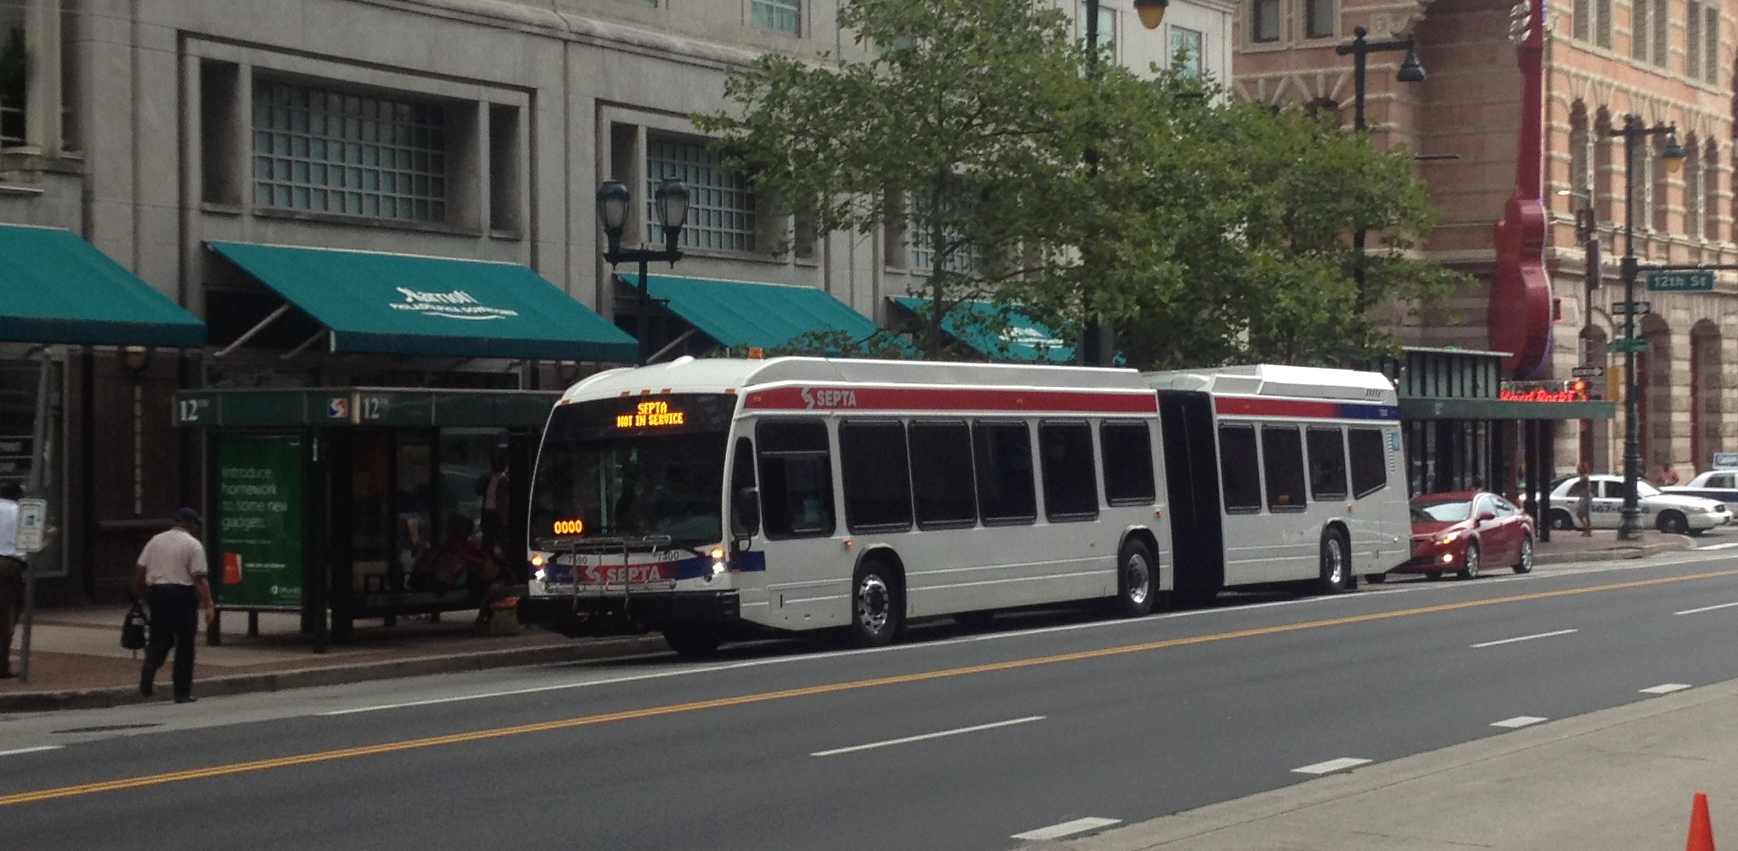 SEPTA’s New Articulated Buses